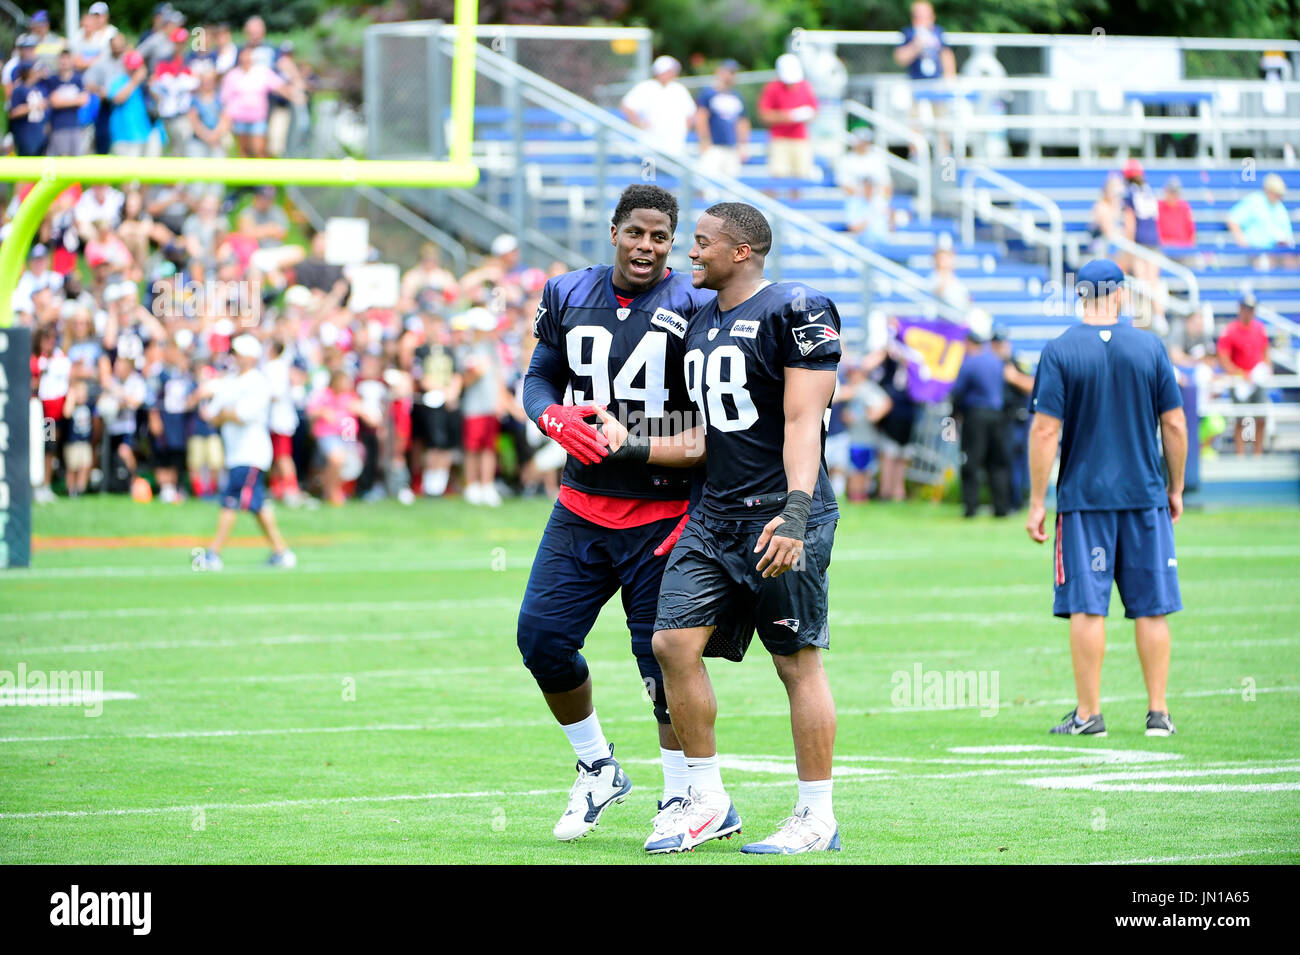 Foxborough, Massachusetts, USA. 28th July, 2017. New England Patriots defensive end Kony Ealy (94) and defensive lineman Trey Flowers (98) shake hands at at the New England Patriots training camp held at Gillette Stadium, in Foxborough, Massachusetts. Eric Canha/CSM/Alamy Live News Stock Photo